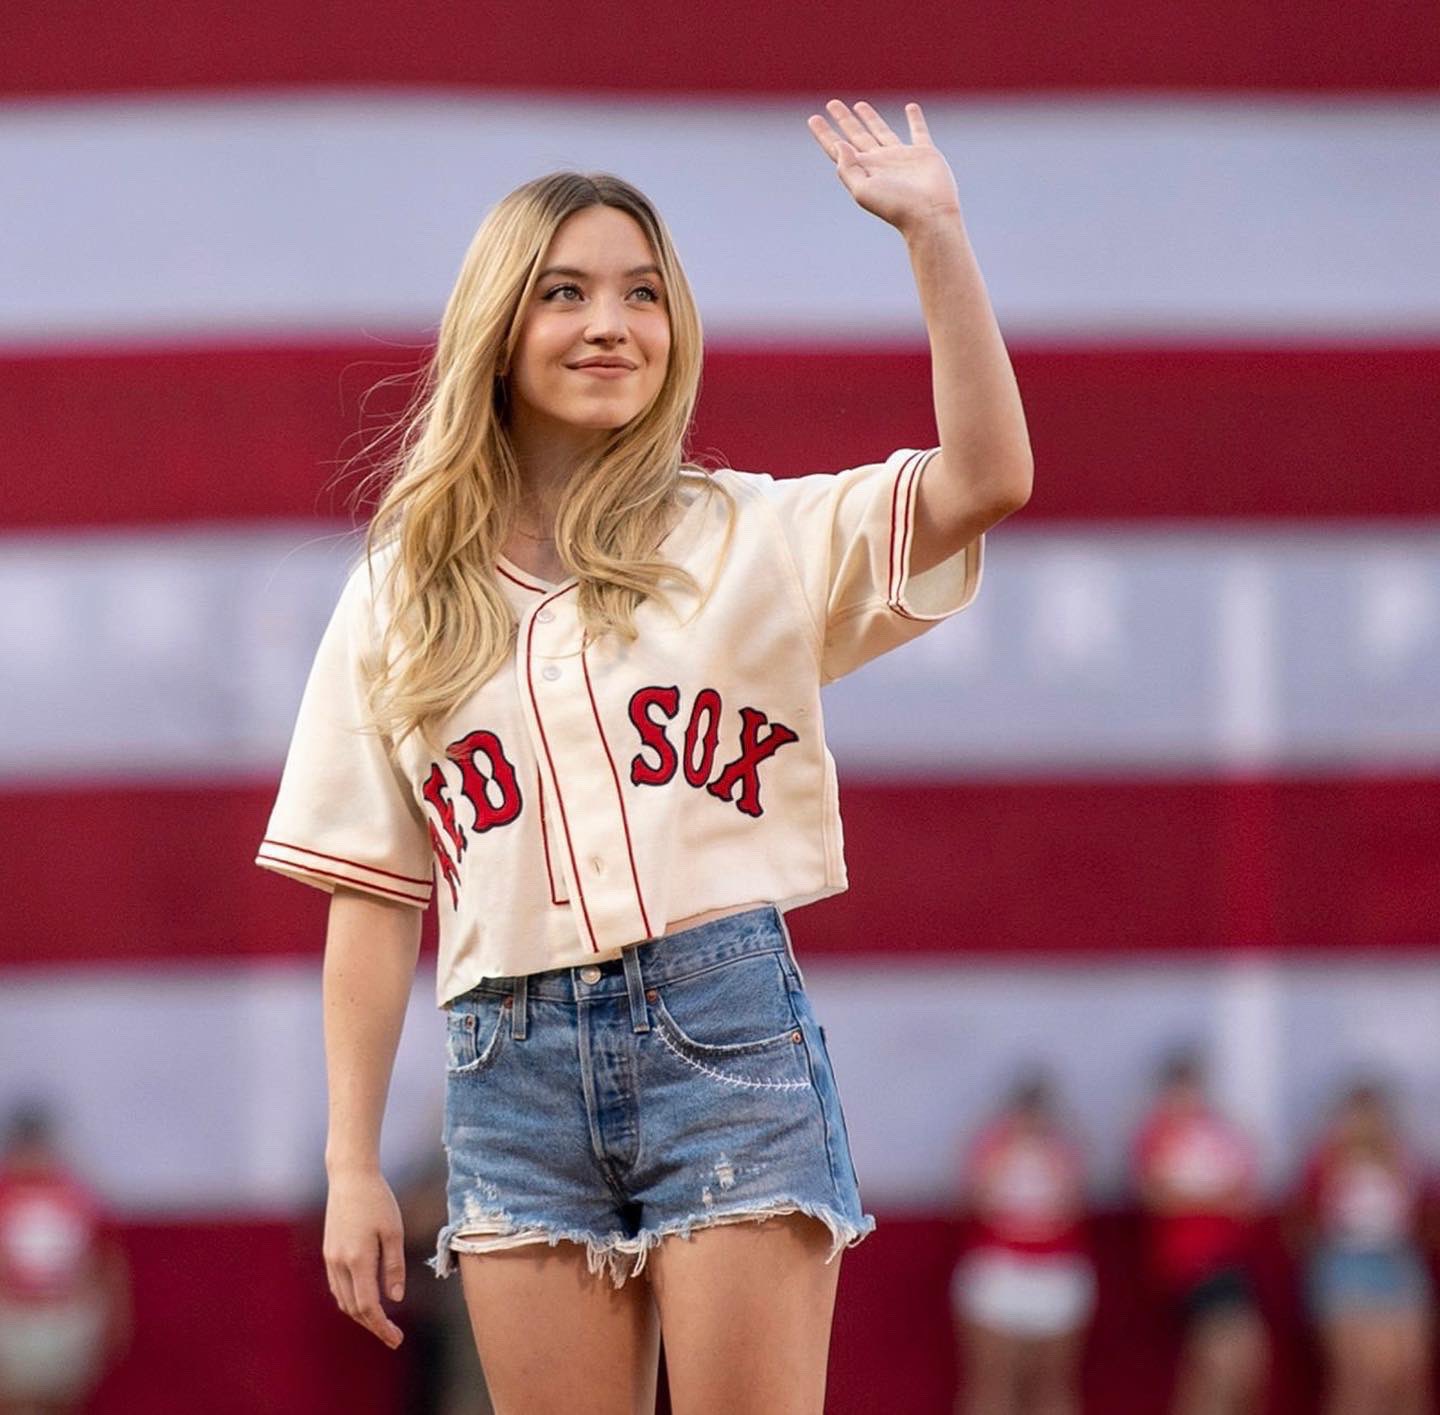 Rate Sydney Sweeney's first pitch, Major League Baseball, baseball, Boston Red  Sox, Take a bow, Sydney Sweeney #MLB #baseball #redsox #sydneysweeney  #euphoria, By MLB Europe